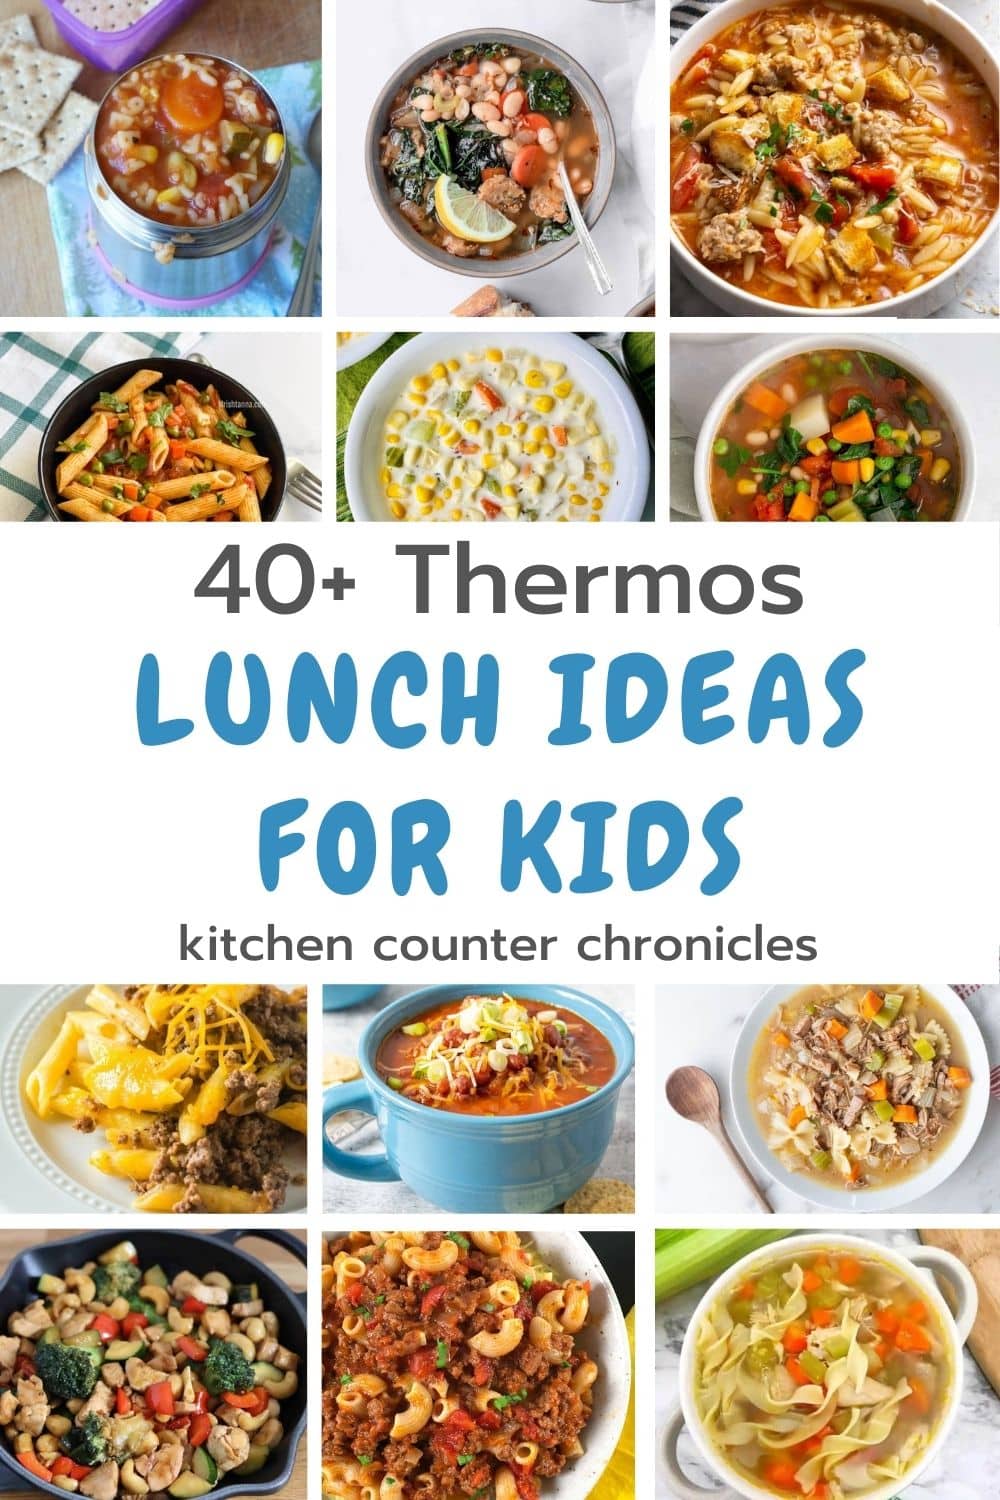 https://www.kitchencounterchronicle.com/wp-content/uploads/2022/08/40-thermos-lunch-ideas-for-kids-collage-featured-image.jpg